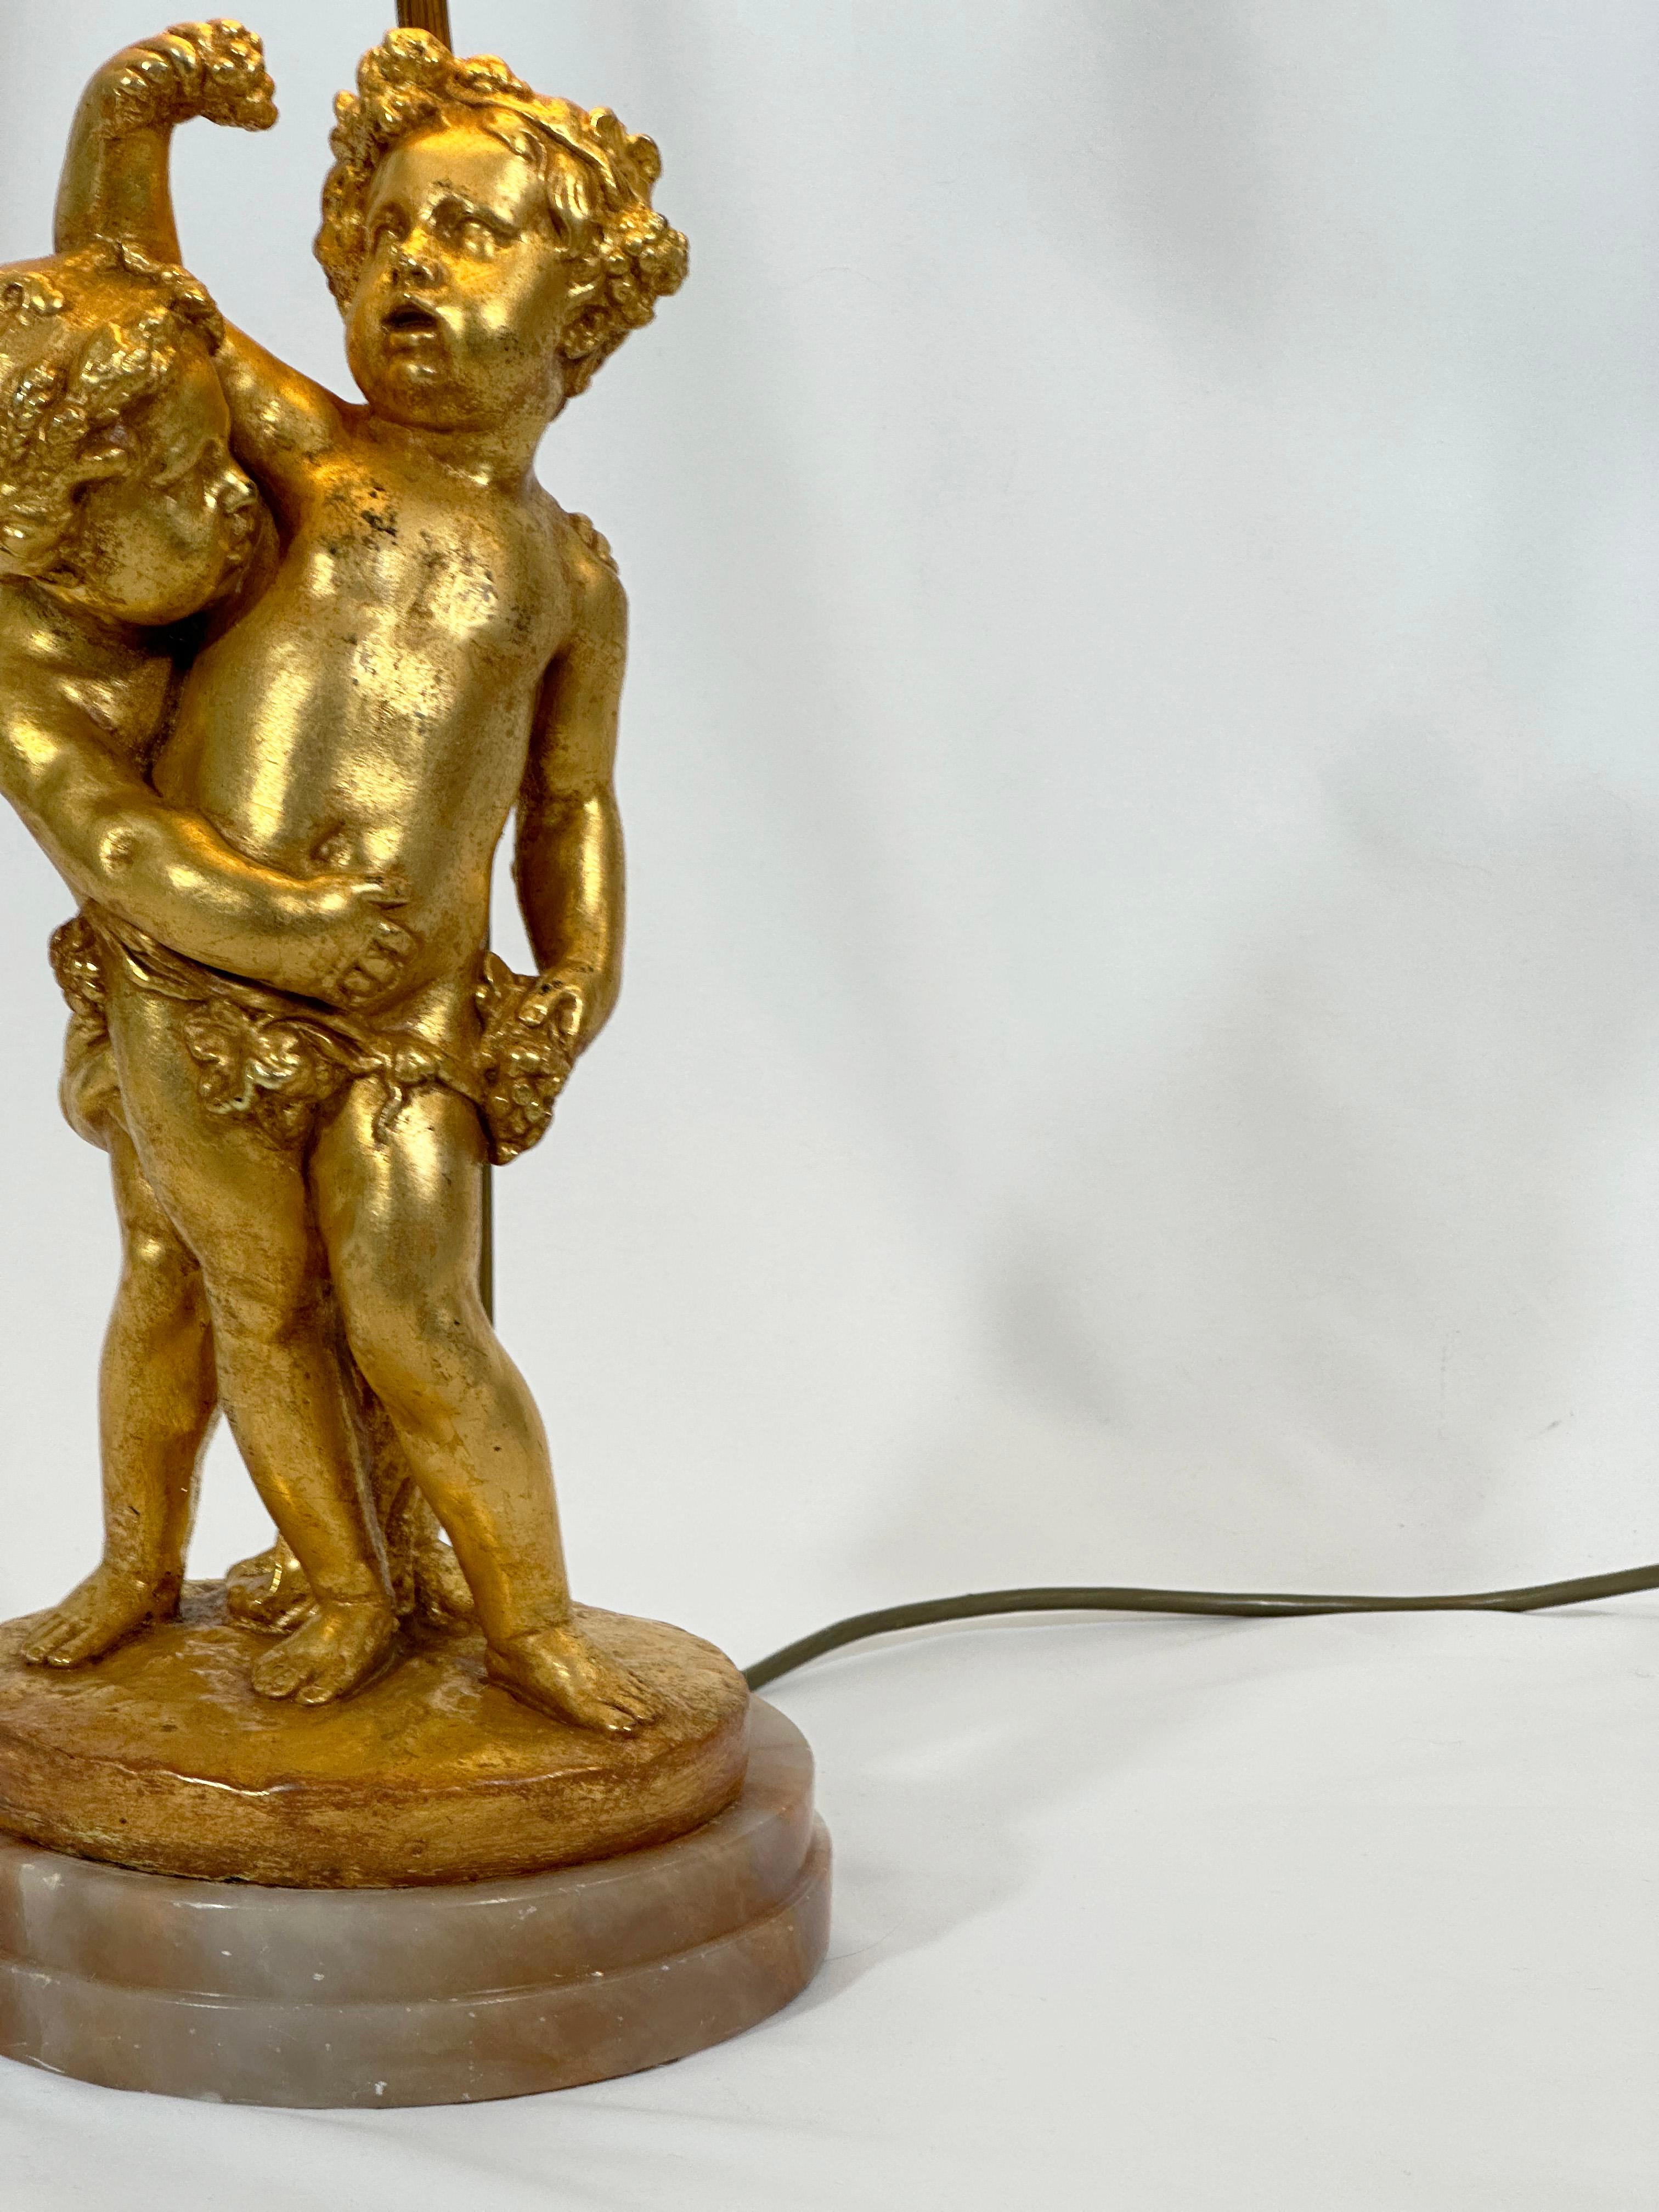 Crafted in Italy’s post-war design renaissance, this gilded table lamp marries the playful charm of putti—cherubic figures drawn from the artistic wells of Renaissance and Rococo—with the grandeur of mid-century aesthetics. The centrepiece, a